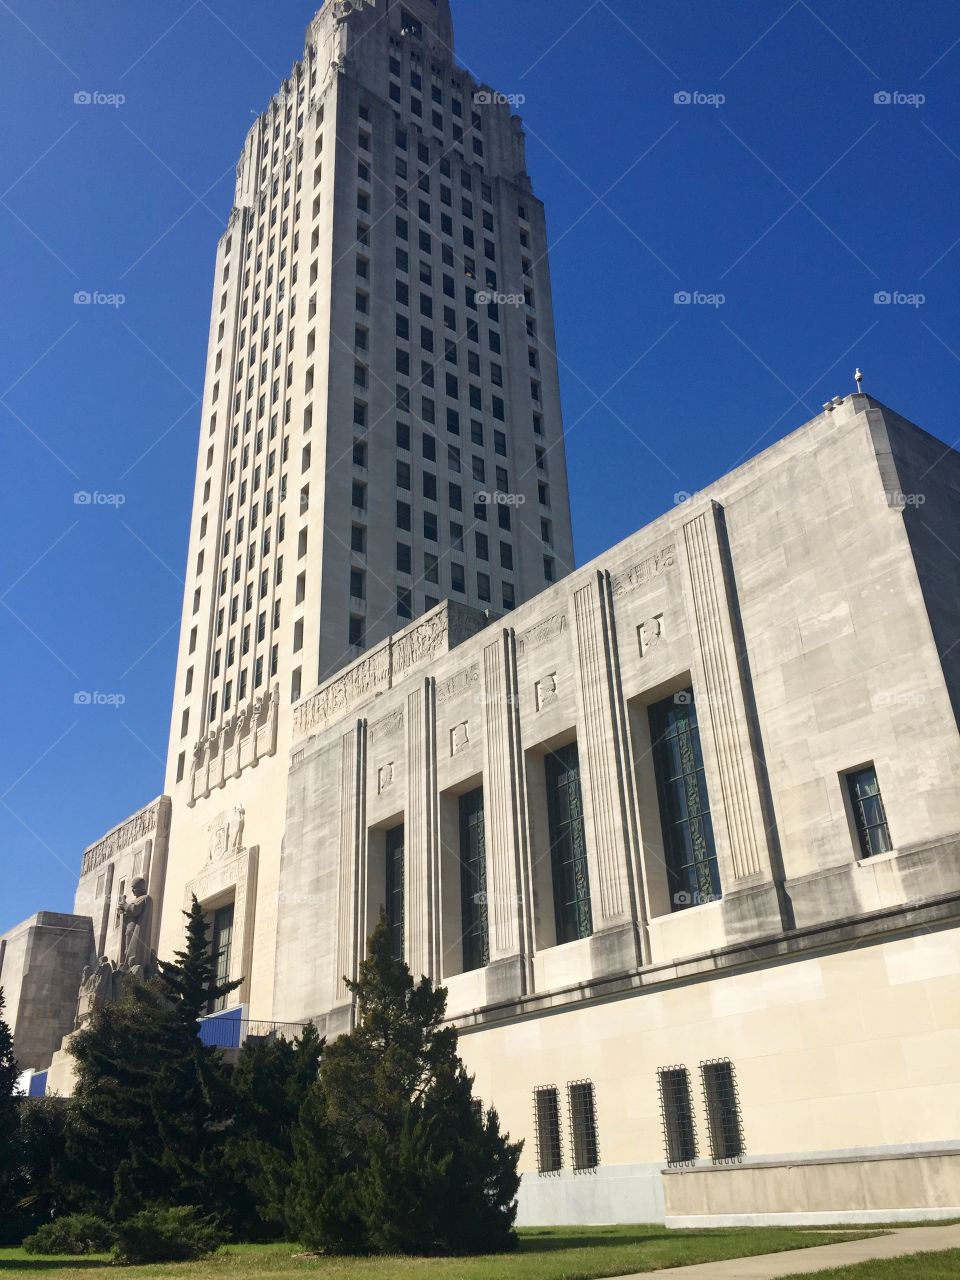 The “new” Louisiana State capital building on a gorgeous February day. 